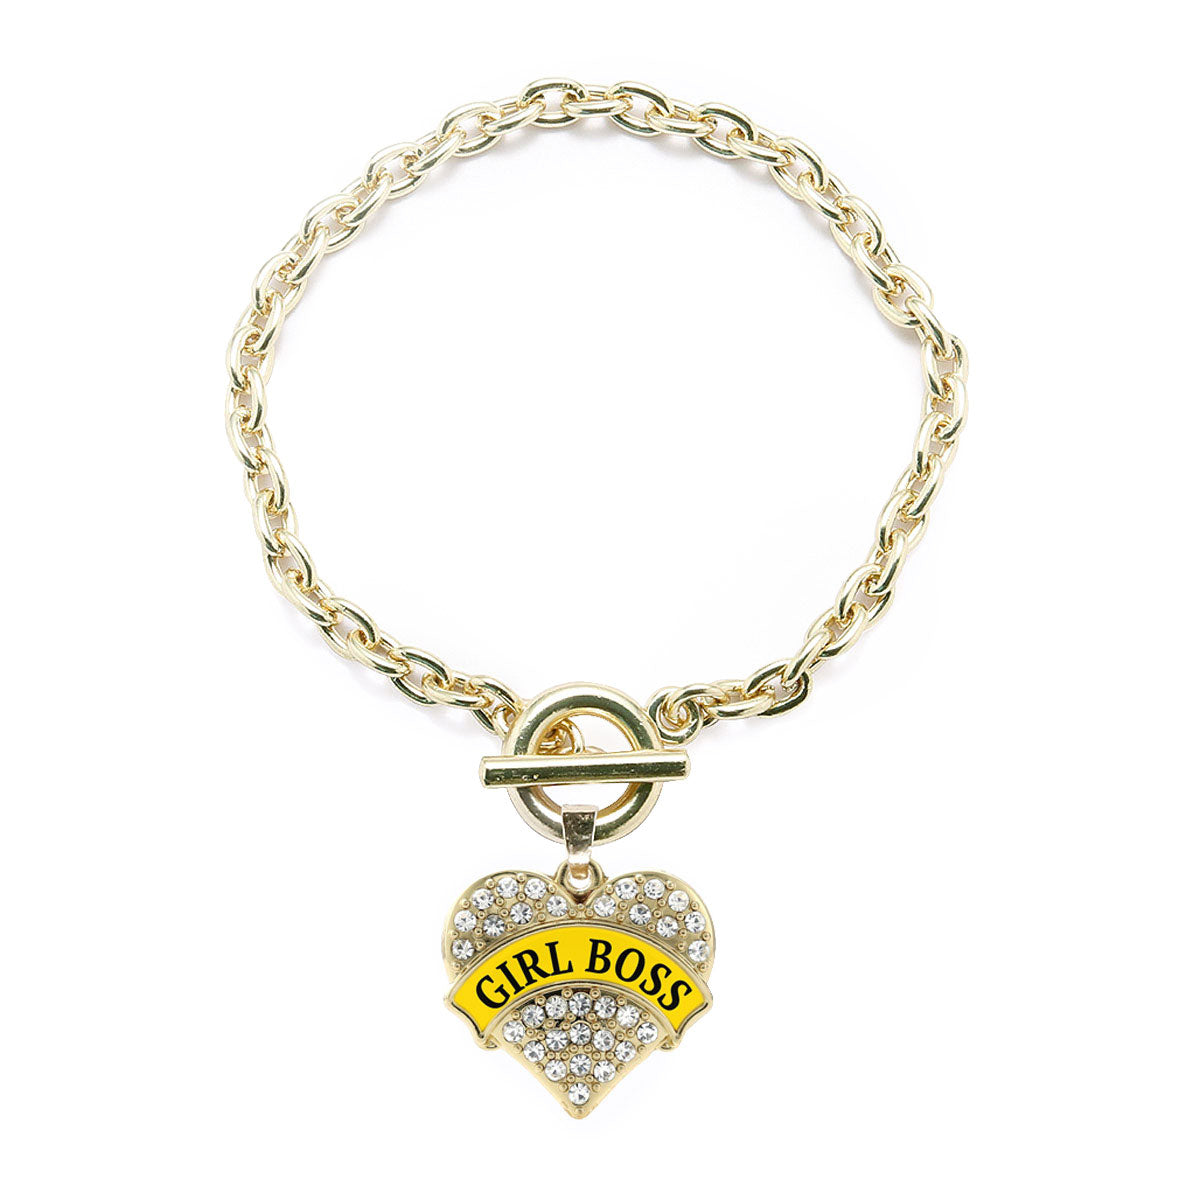 Gold Yellow Girl Boss Pave Heart Charm Toggle Bracelet